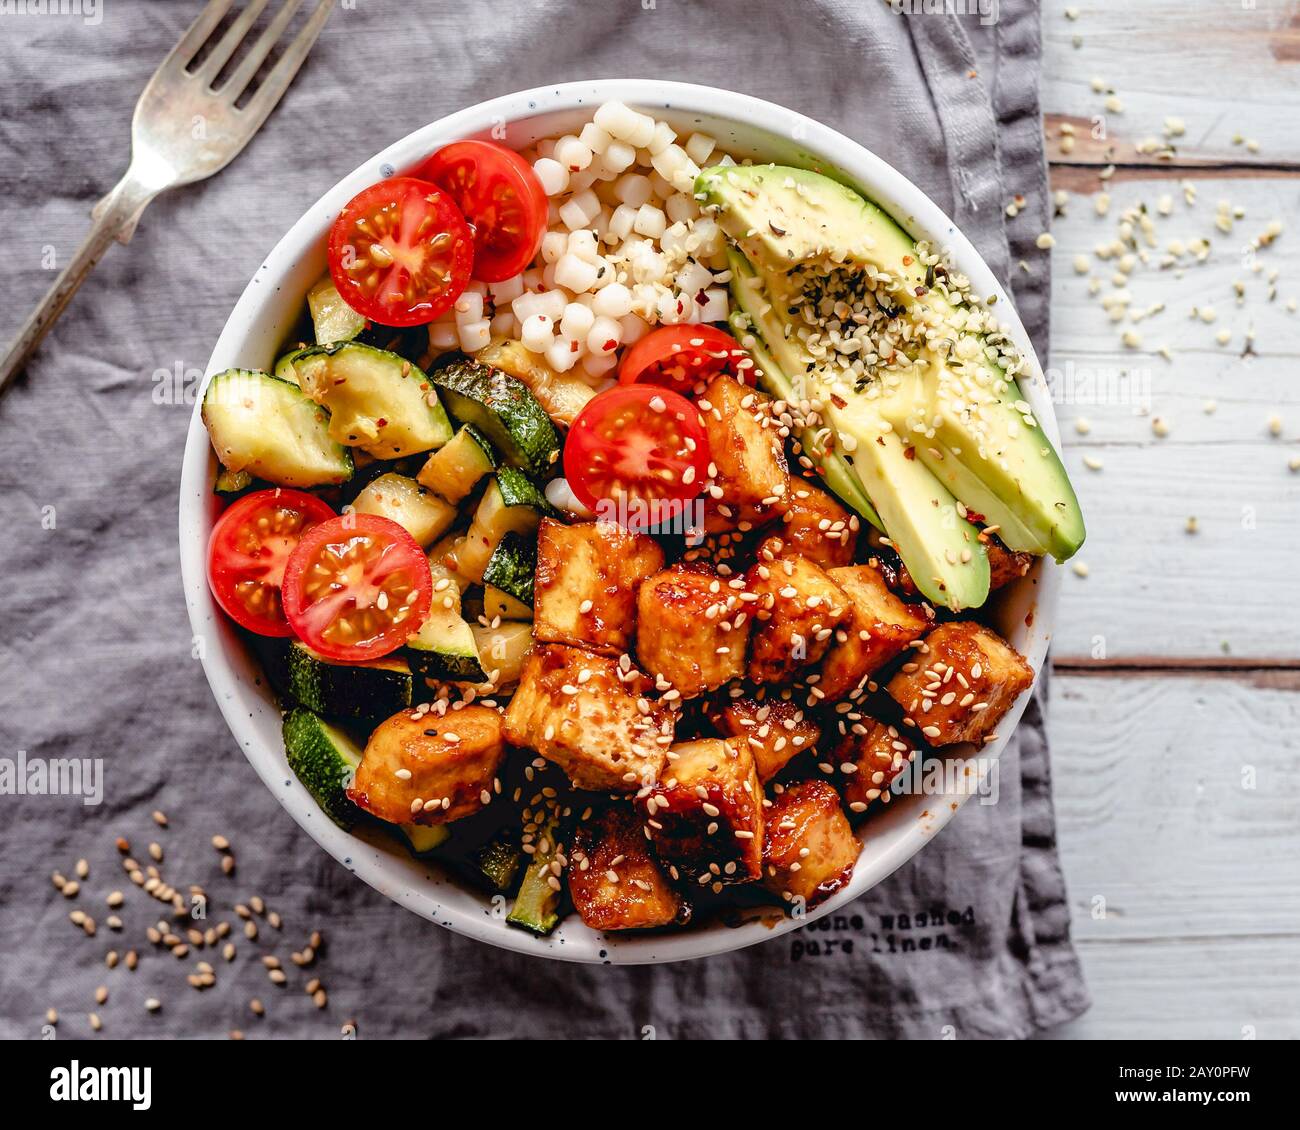 Pan fried tofu with pearl cous-cous, fried courgette, avocado, tomato and sesame seeds Stock Photo